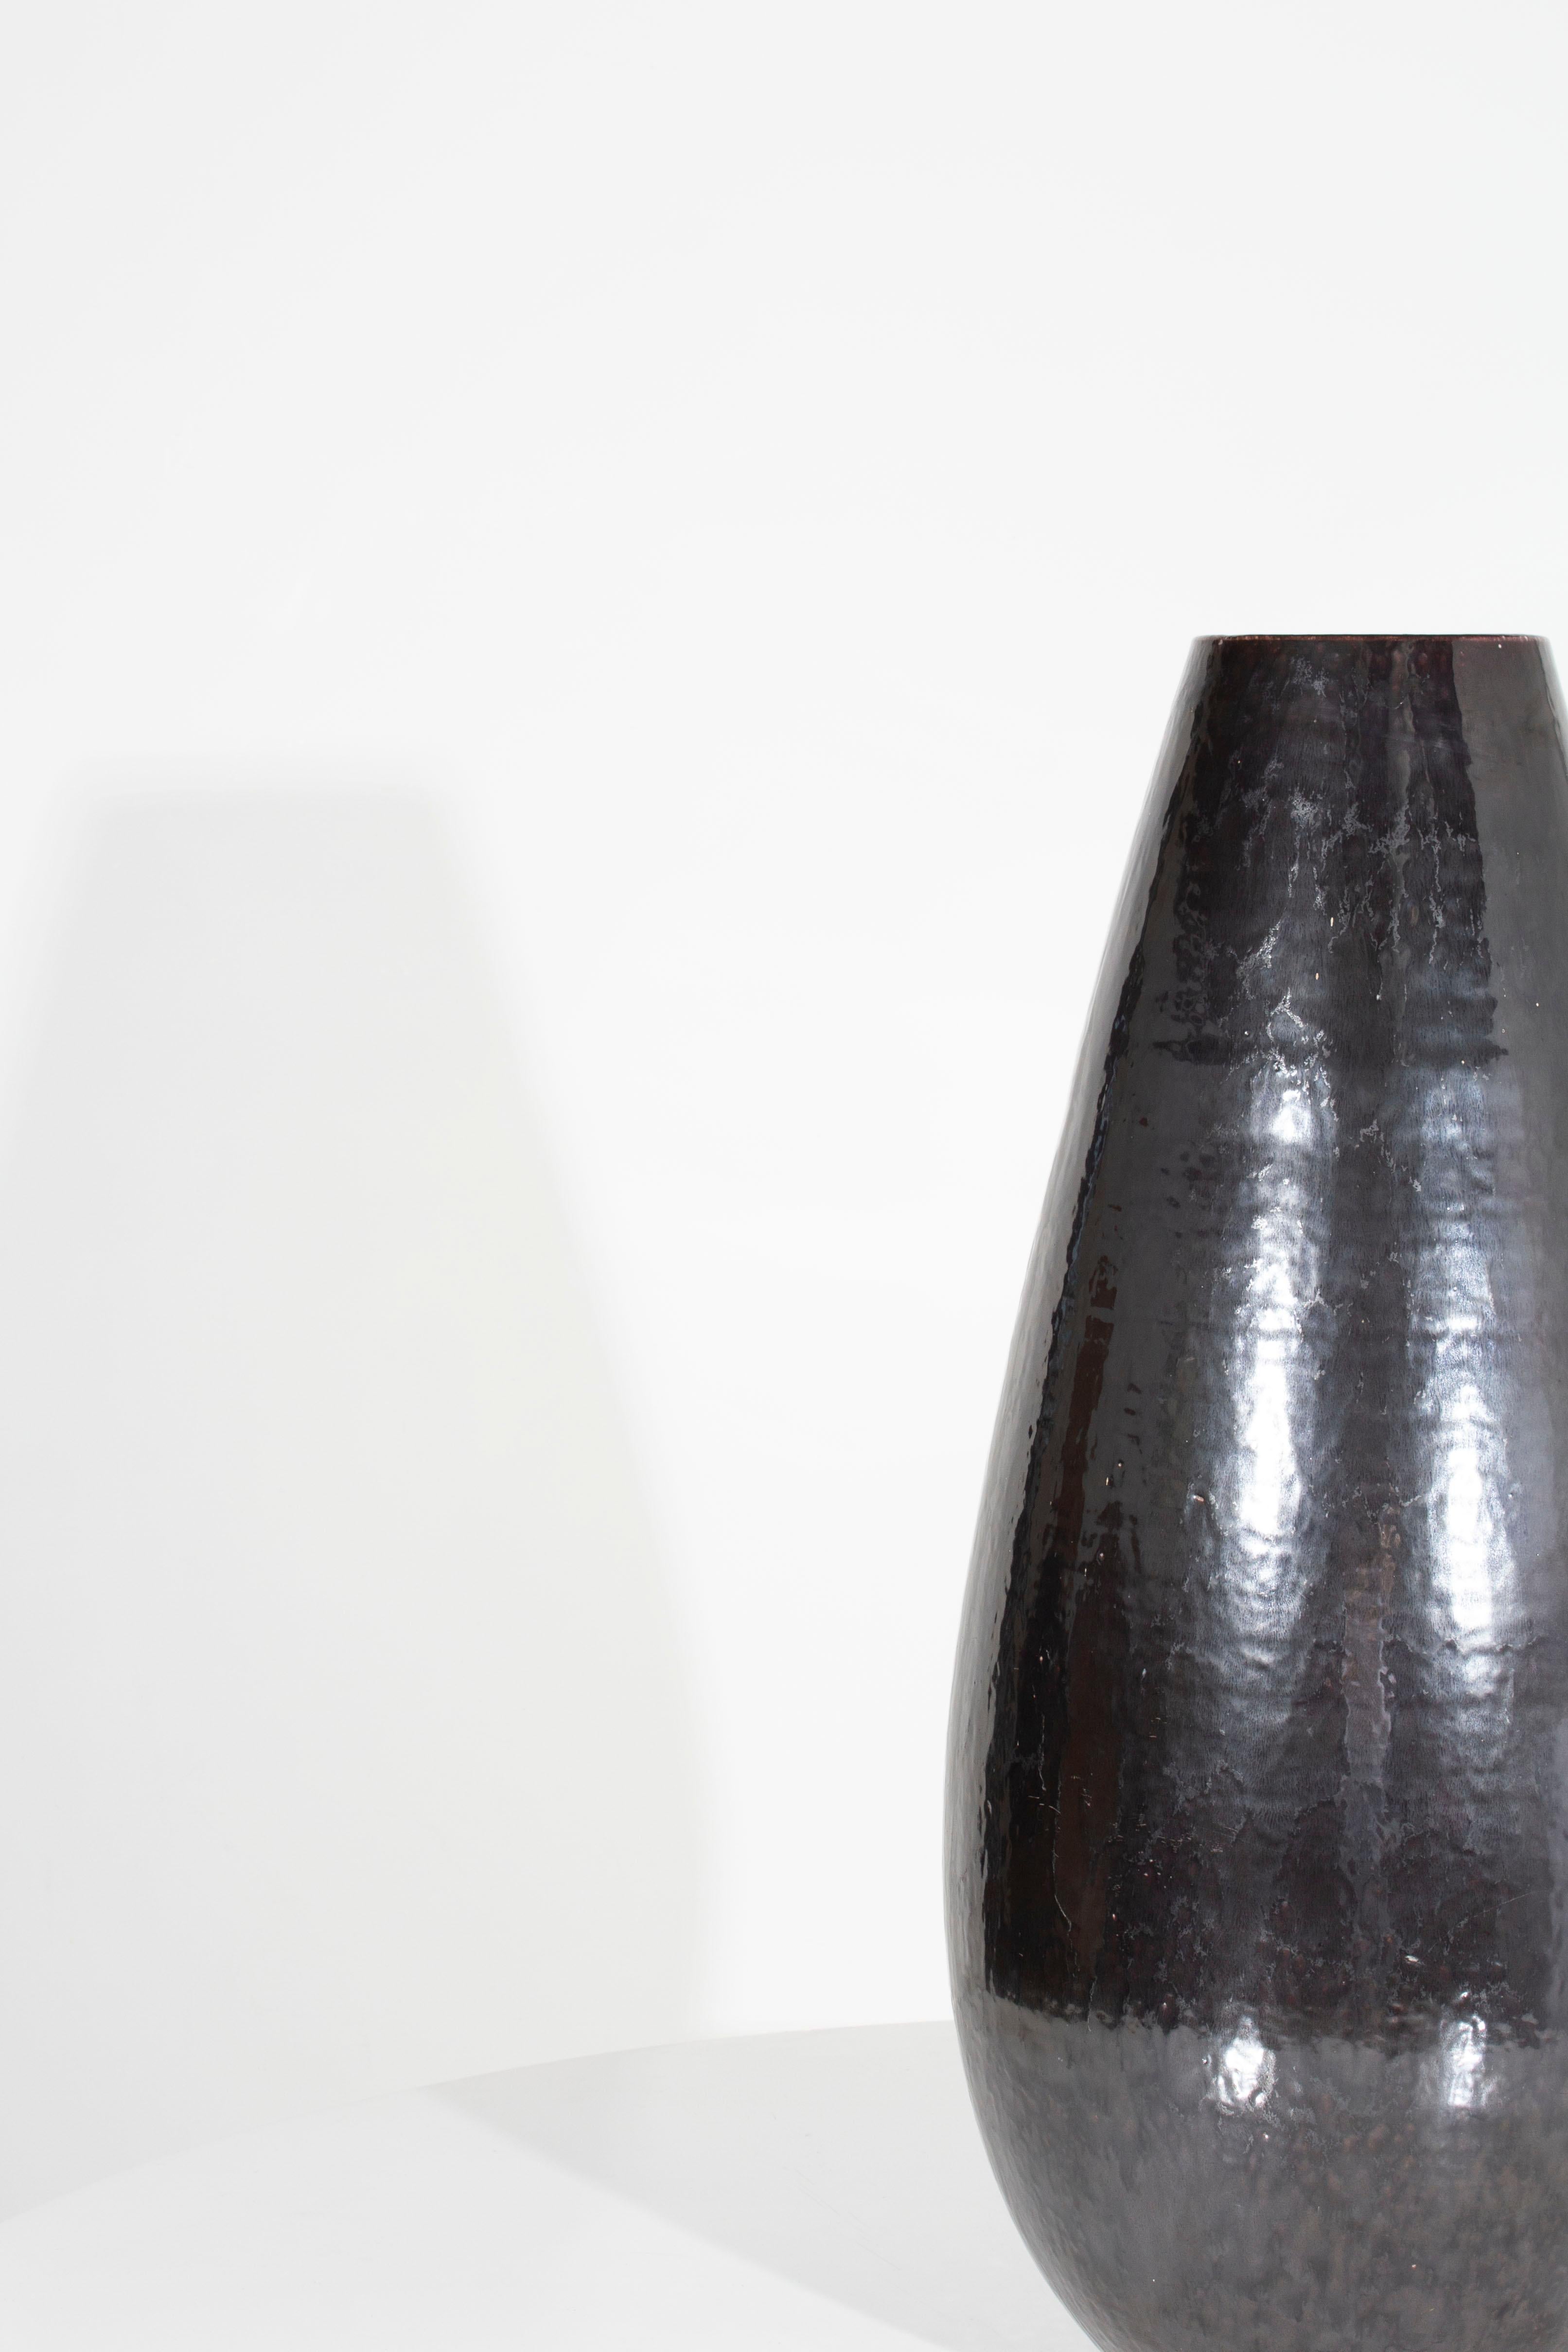 Tall black vase with hammered distressed steel finish

Sold individually, 2 available.

Piece from our one-of-a-kind collection, Le Monde. Exclusive to Brendan Bass. 
In my organic, contemporary, vintage and mid-century modern aesthetic.

Globally